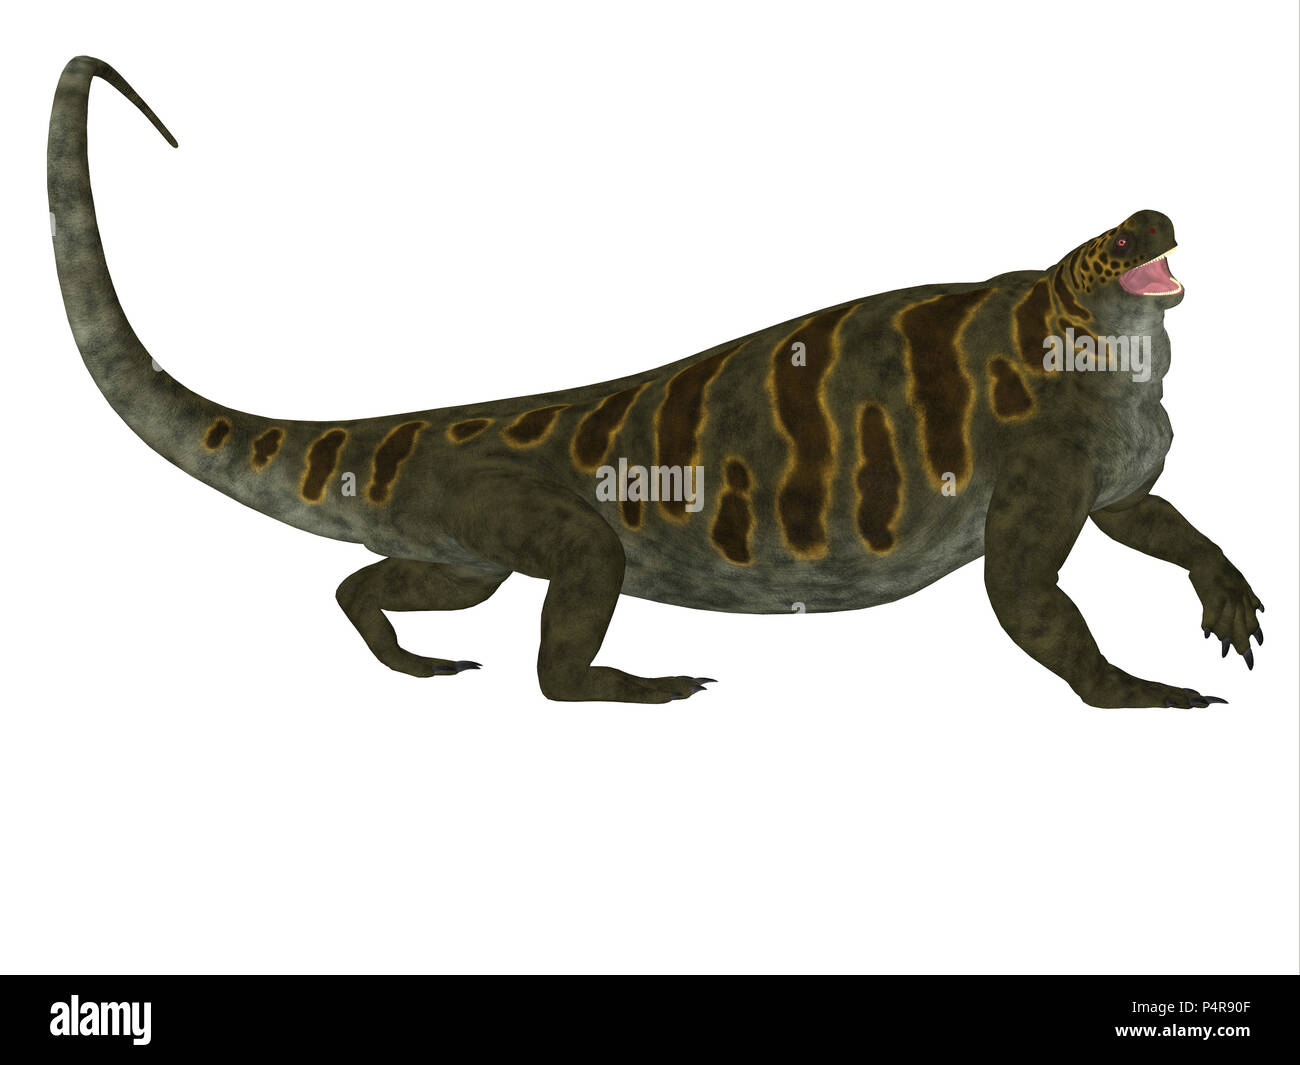 Cotylorhynchus was a synapsid herbivorous reptile that lived in North America during the Permian Period. Stock Photo